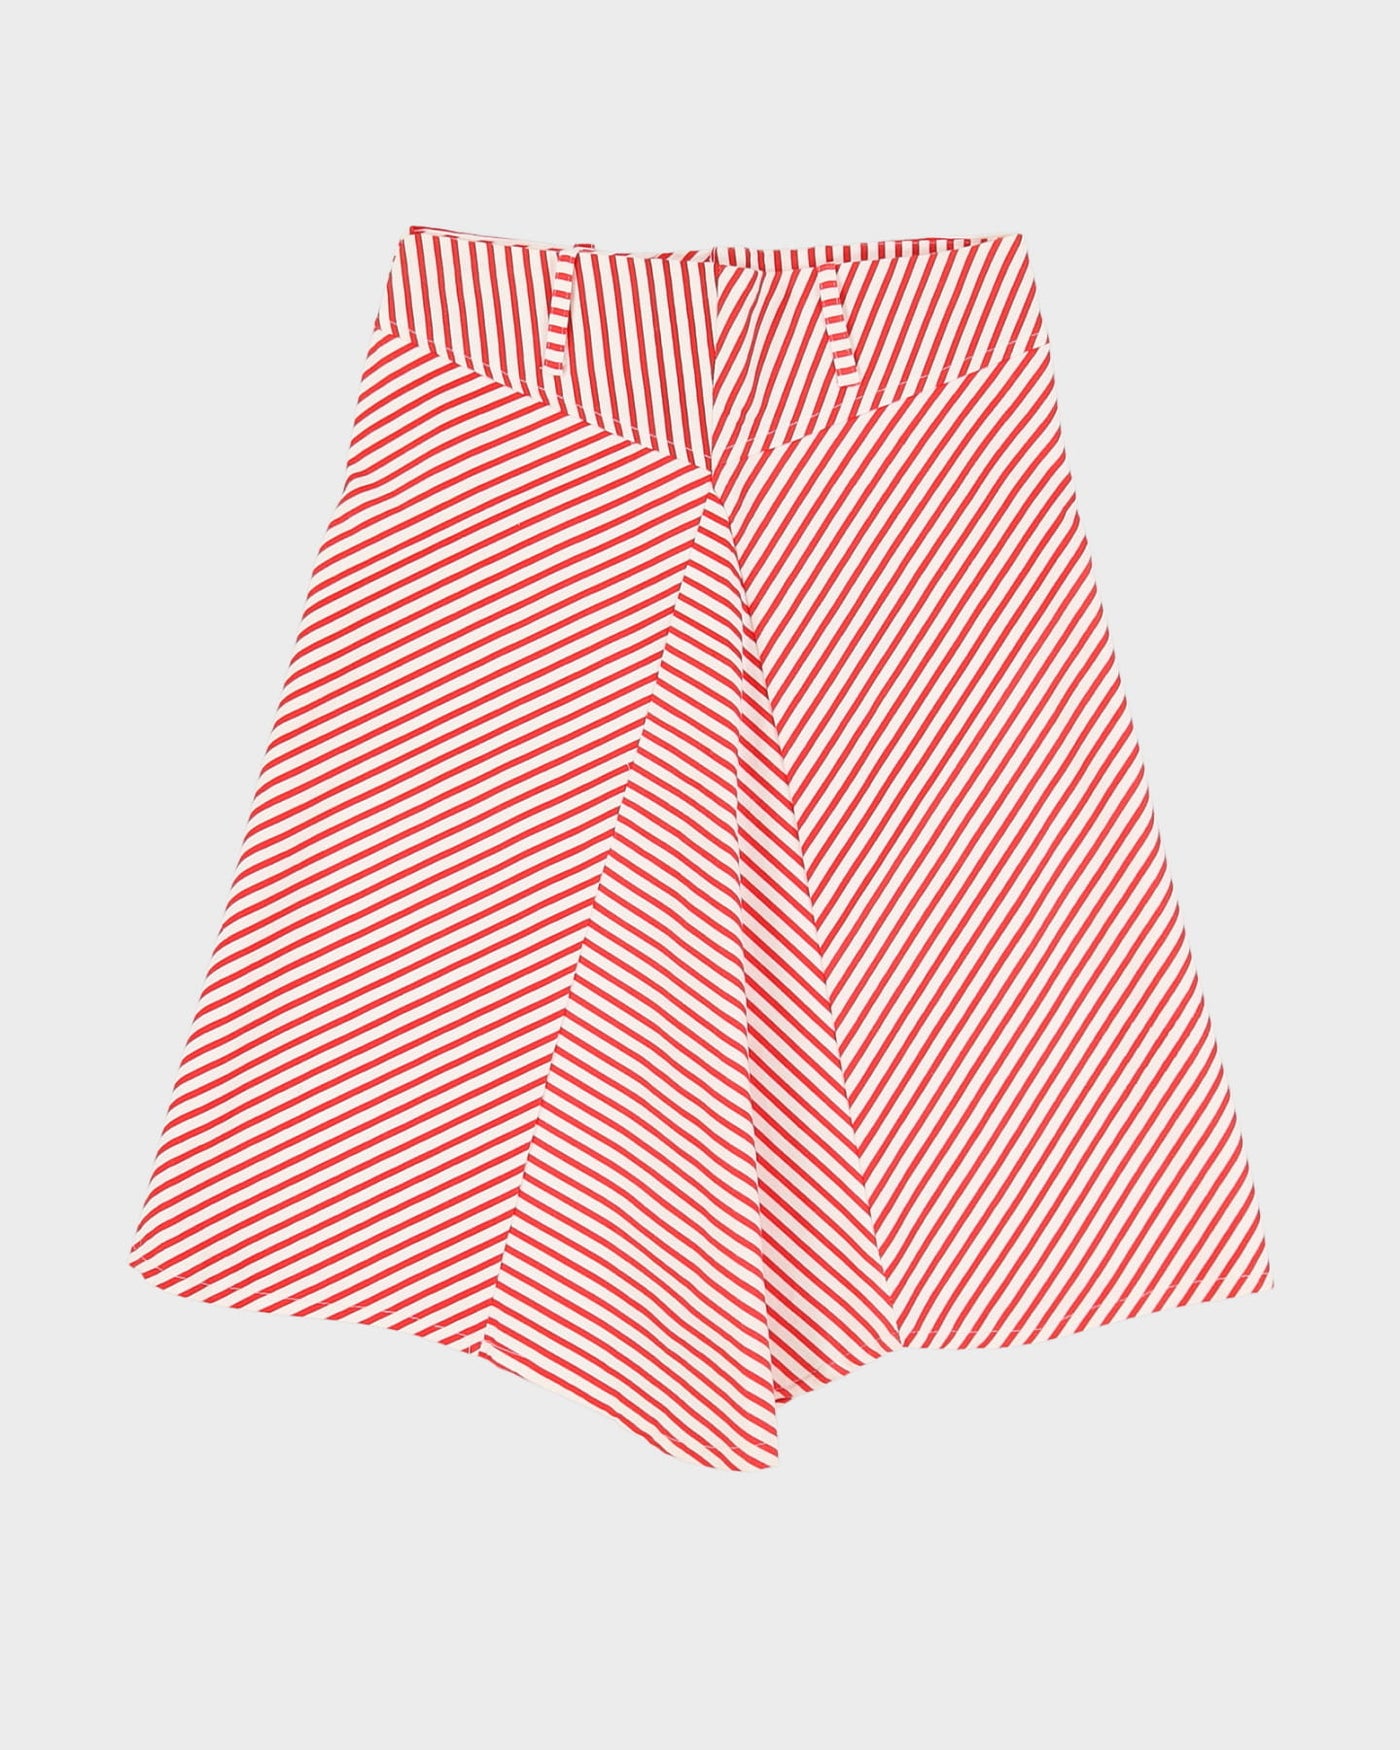 00s candy Striped A-line Skirt - XS